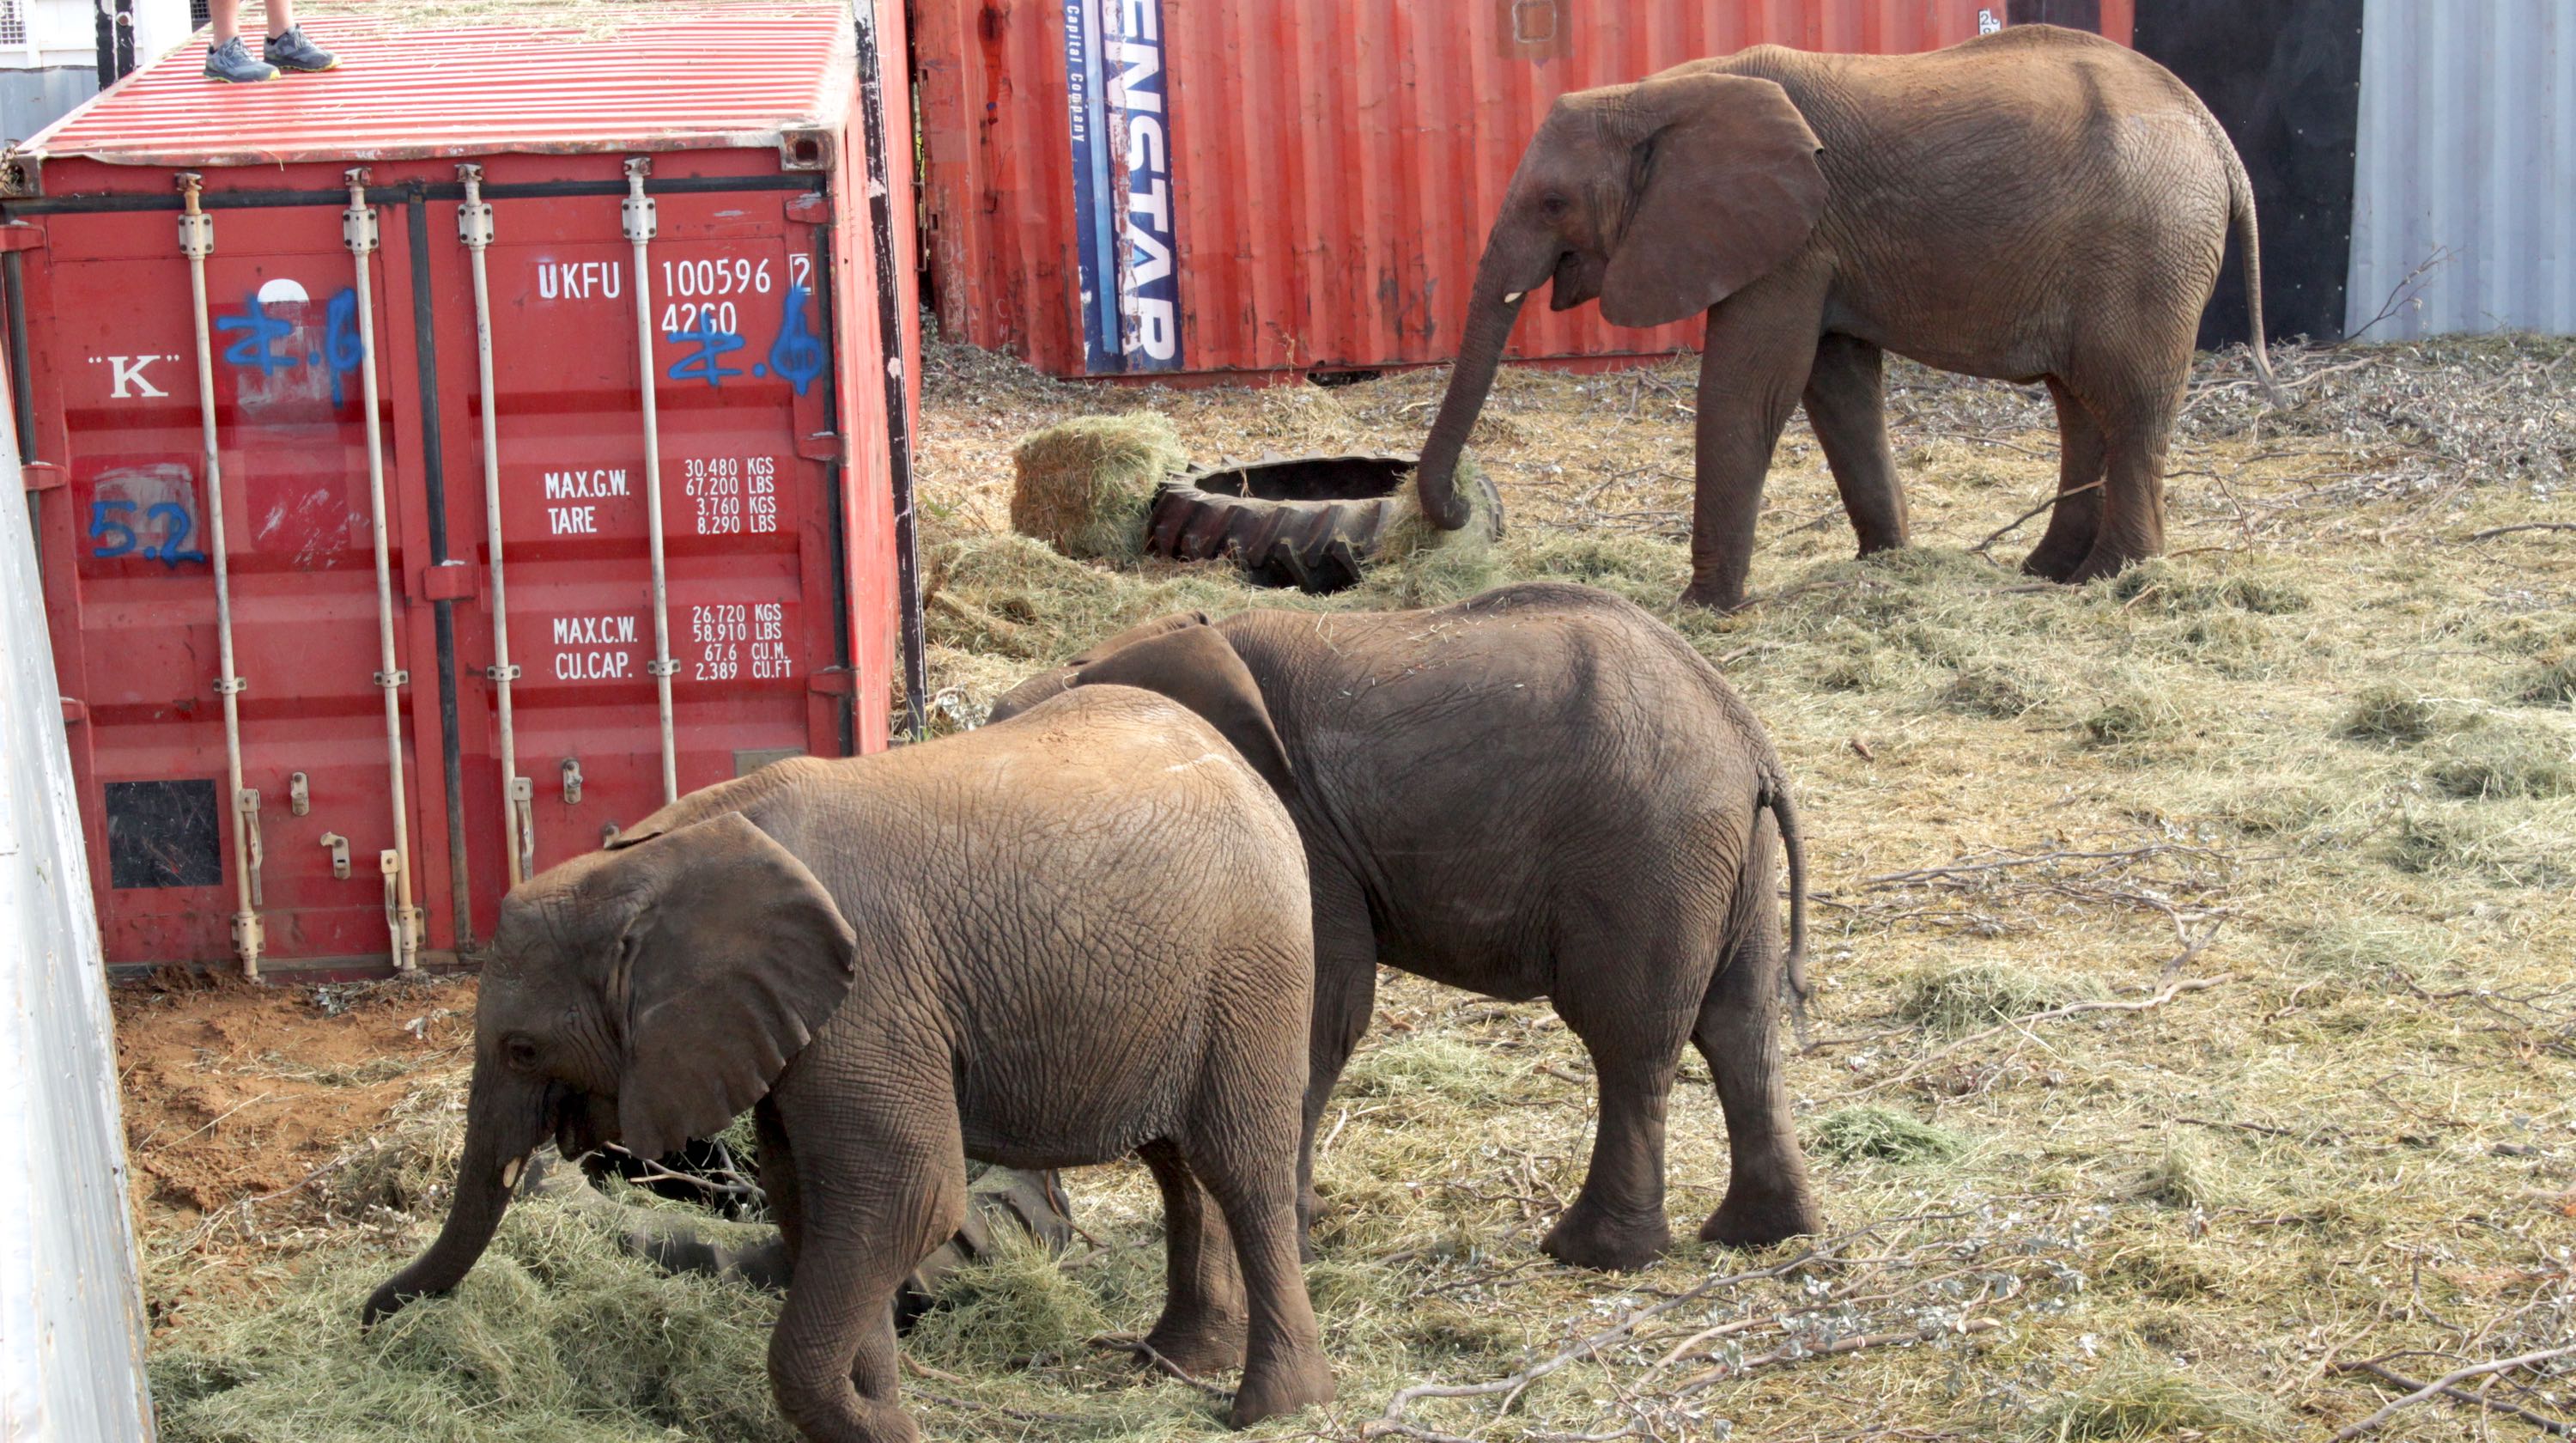 A group of three elephants feeding in amongst various shipping containers while someone watches from on top of a container.